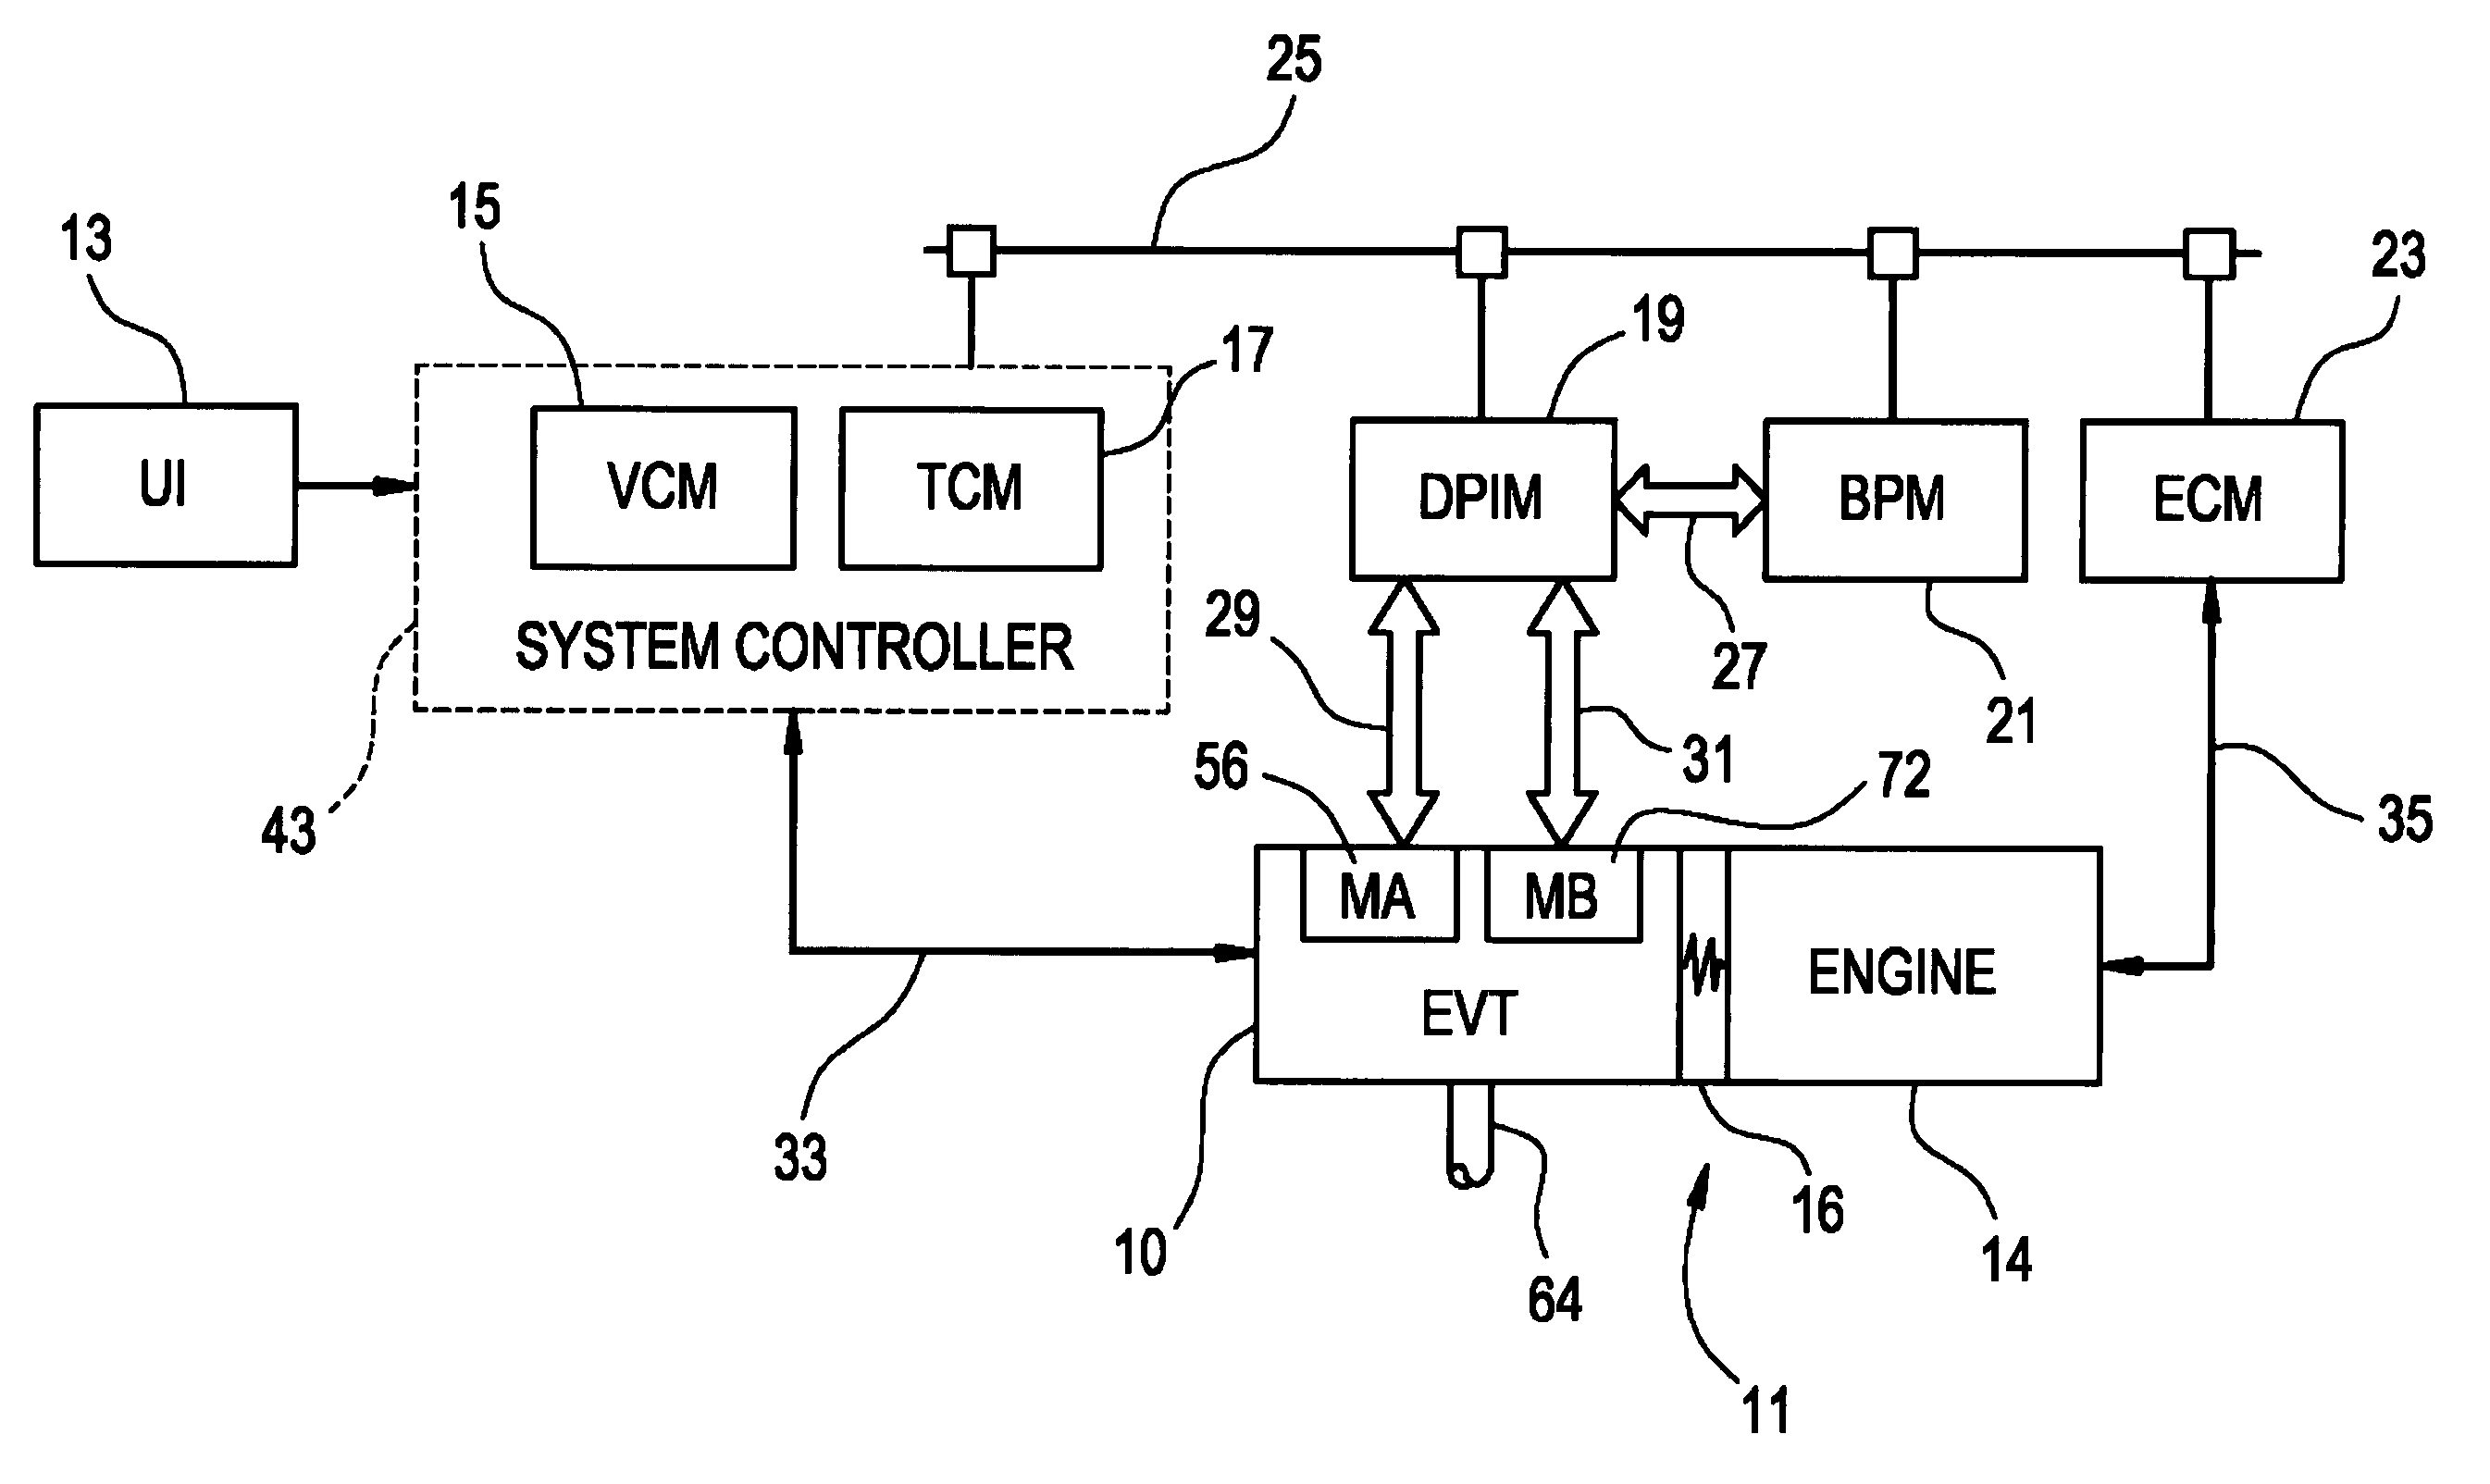 Real-time operating parameter selection in a vehicular transmission